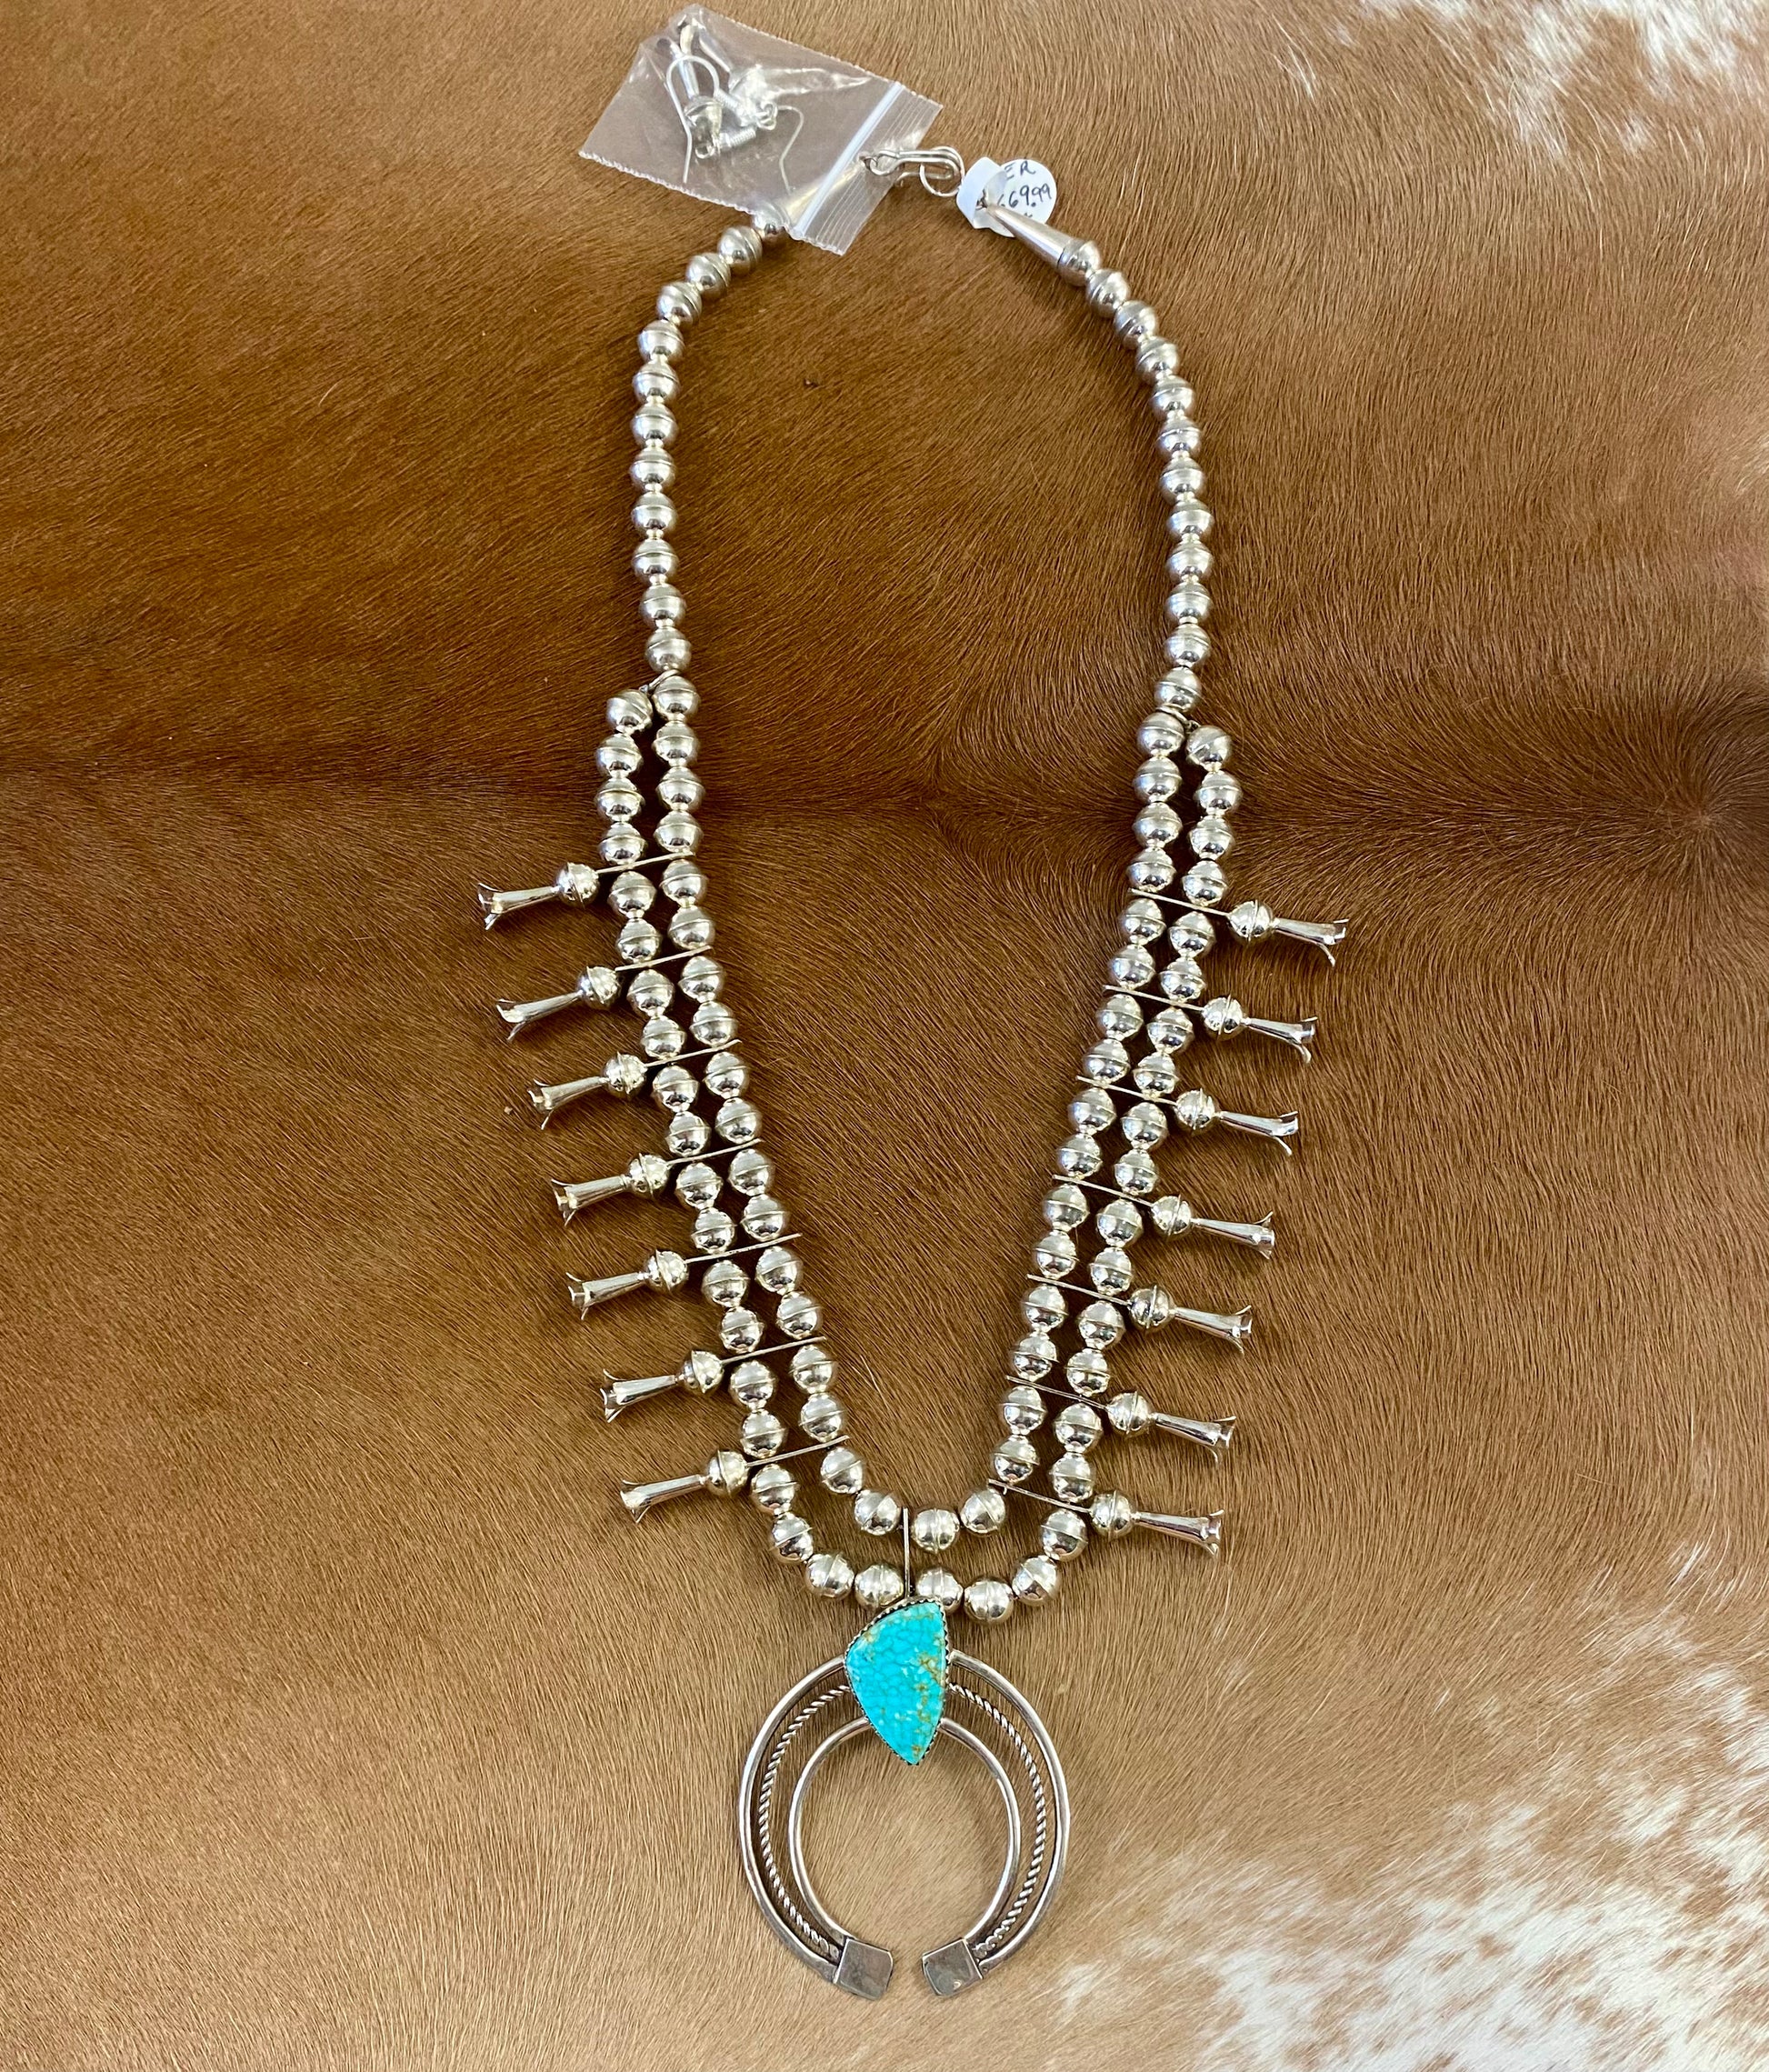 Gorgeous sterling silver handmade Turquoise Squash Blossom necklace stamped STERLING and signed with the initials “PG” on the back of the naja by the artist. A photo of the hallmark will be in the photos above. This necklace will make for a stunning addition to anyone’s jewelry collection. A statement piece for any outfit! The perfect amount of silver and turquoise is handcrafted into this unique piece. 